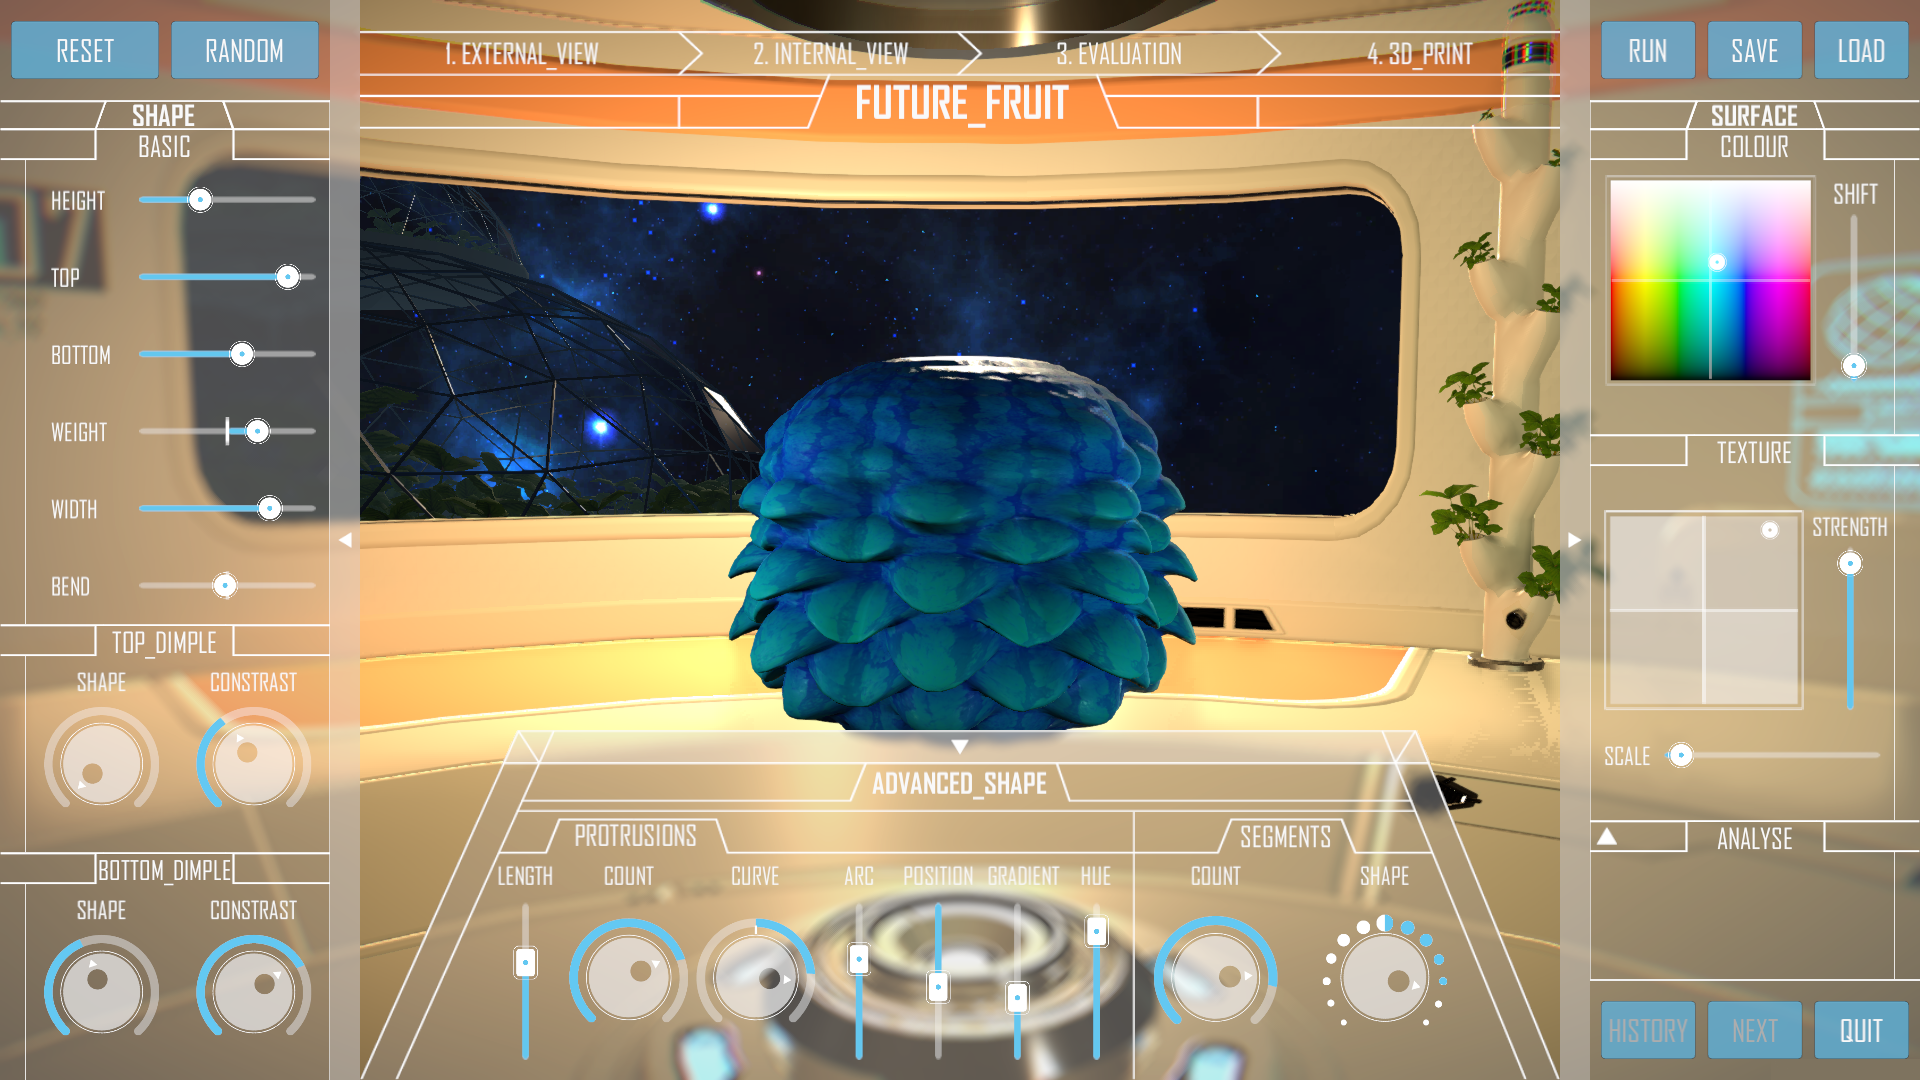 Future Fruit Simulator: A Customisation Interface for 3D Food Printing